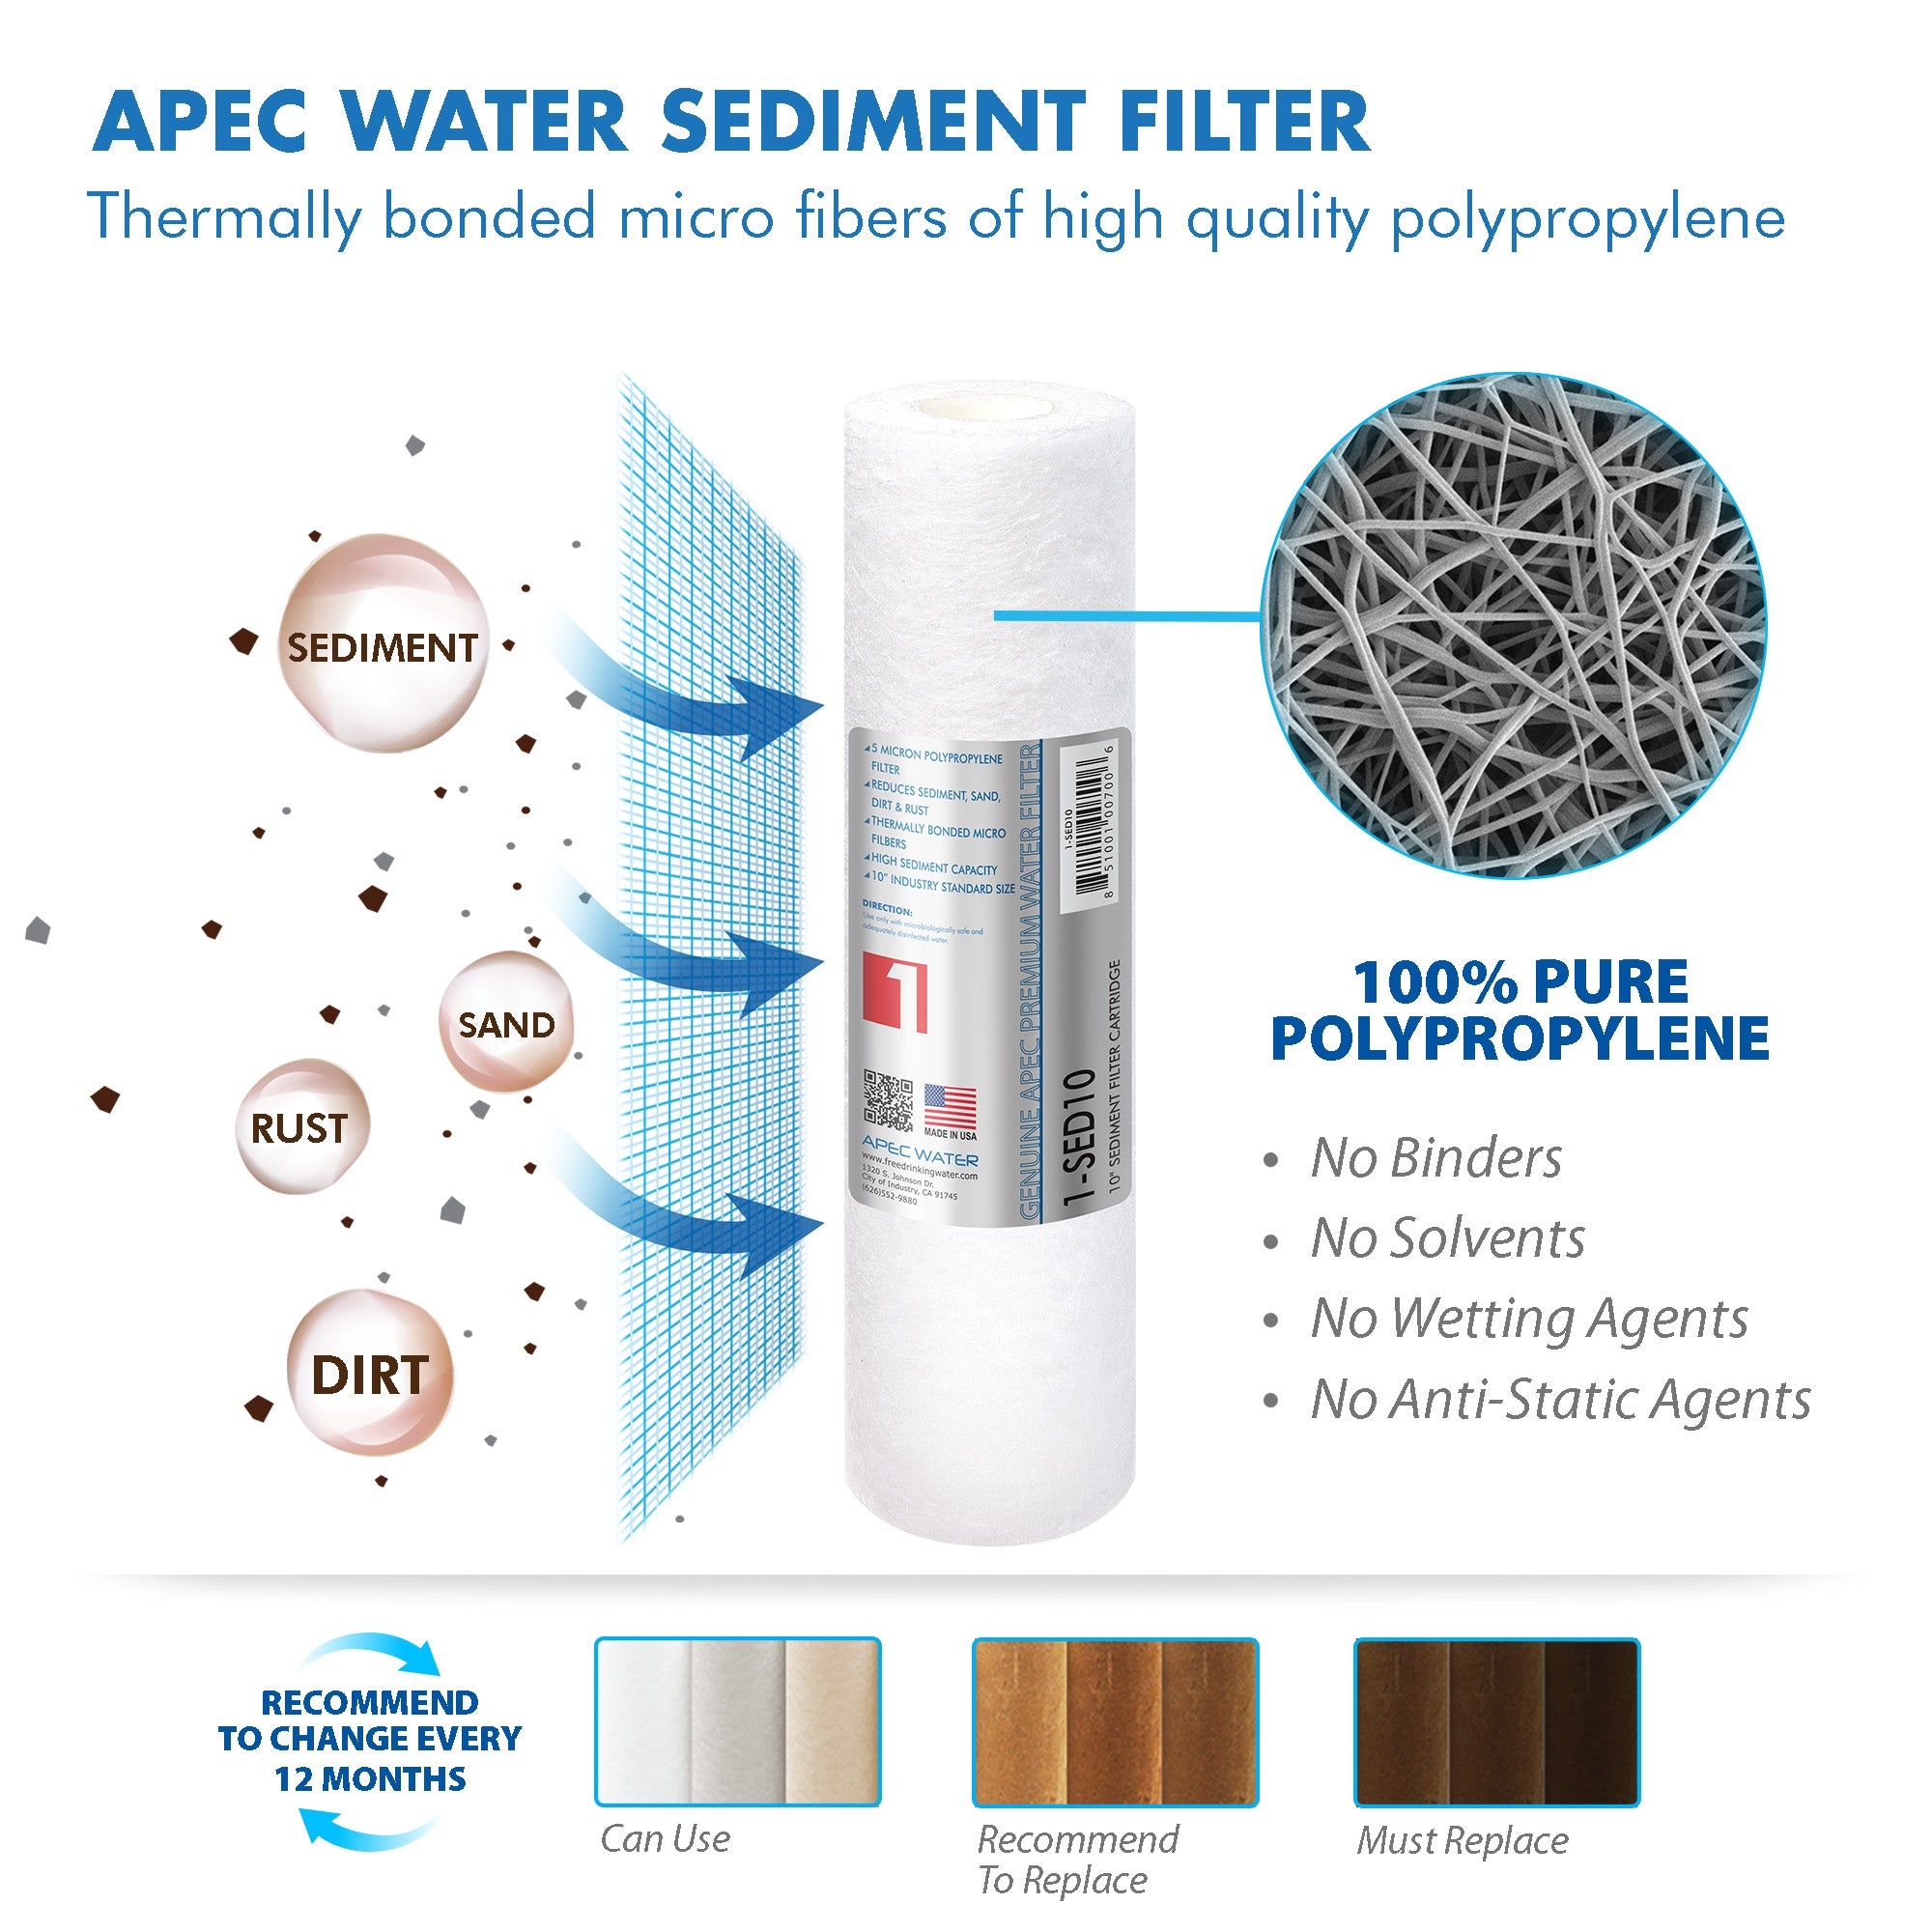 APEC RO Replacement Filters Complete Filter Set for ULTIMATE RO-90 and RO-PERM Models With 1/4"D Tubing (Stages 1-5)